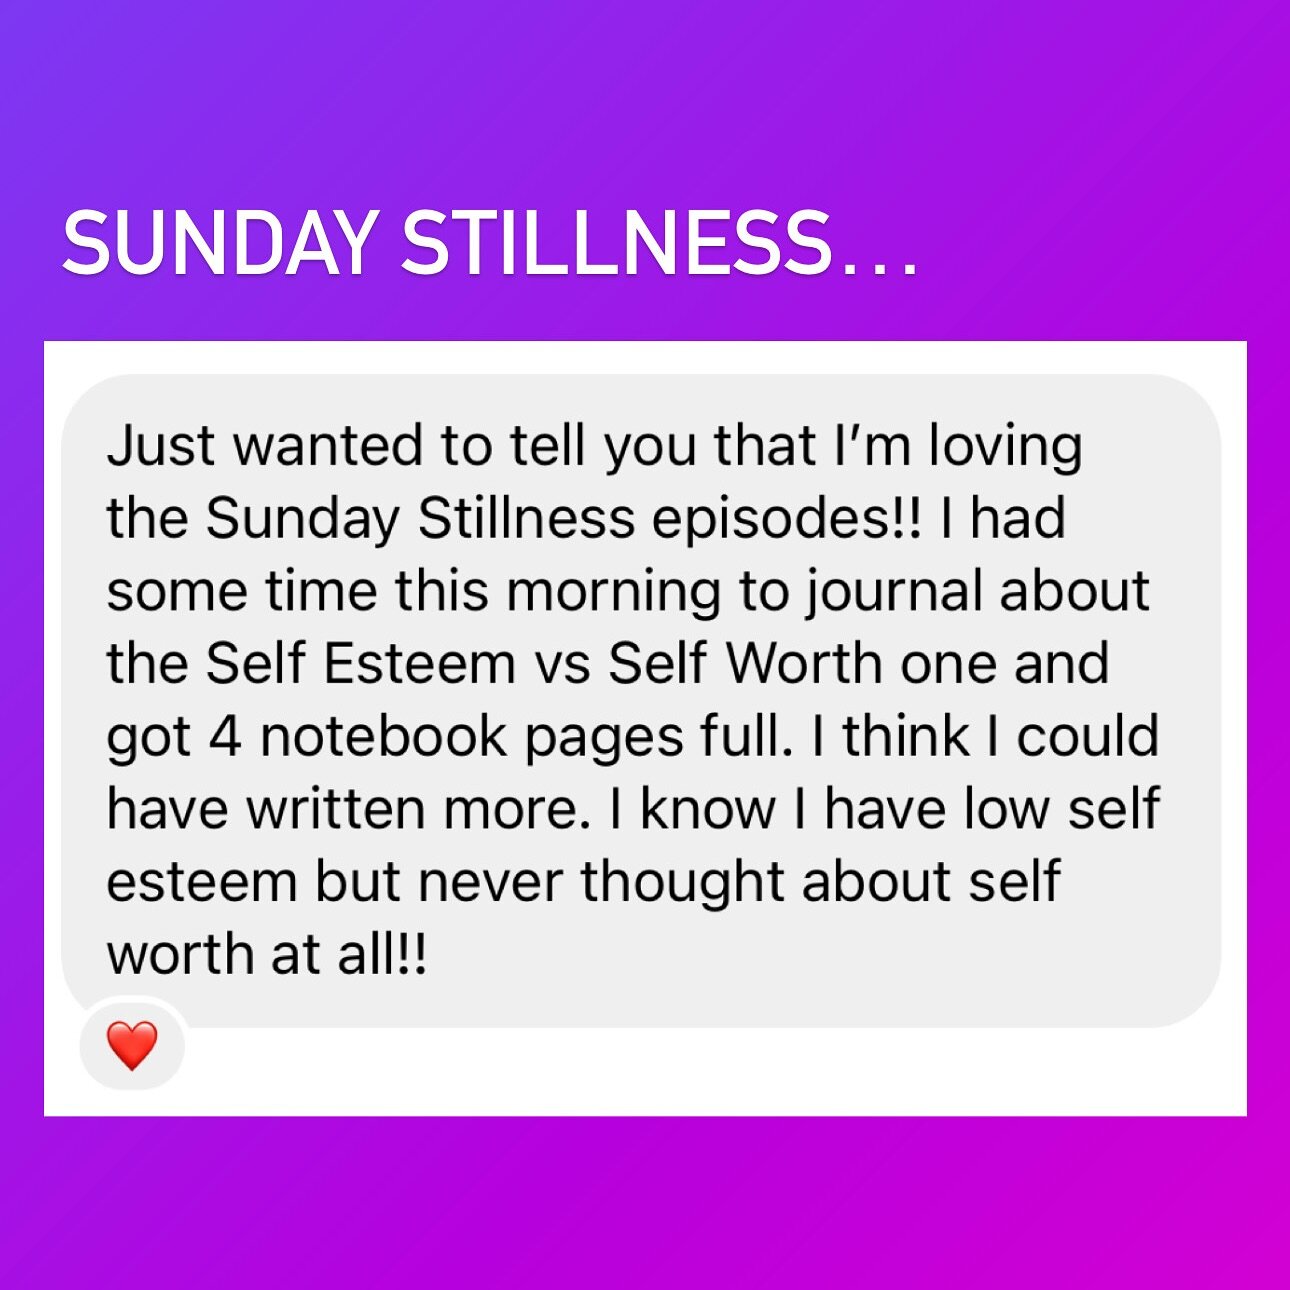 I am having so much fun creating the new Sunday Stillness episodes. Short little weekend episodes focused on one thought or idea for you to ponder throughout the week. 

And I&rsquo;m getting a lot of messages that you&rsquo;re enjoying them, too! Th